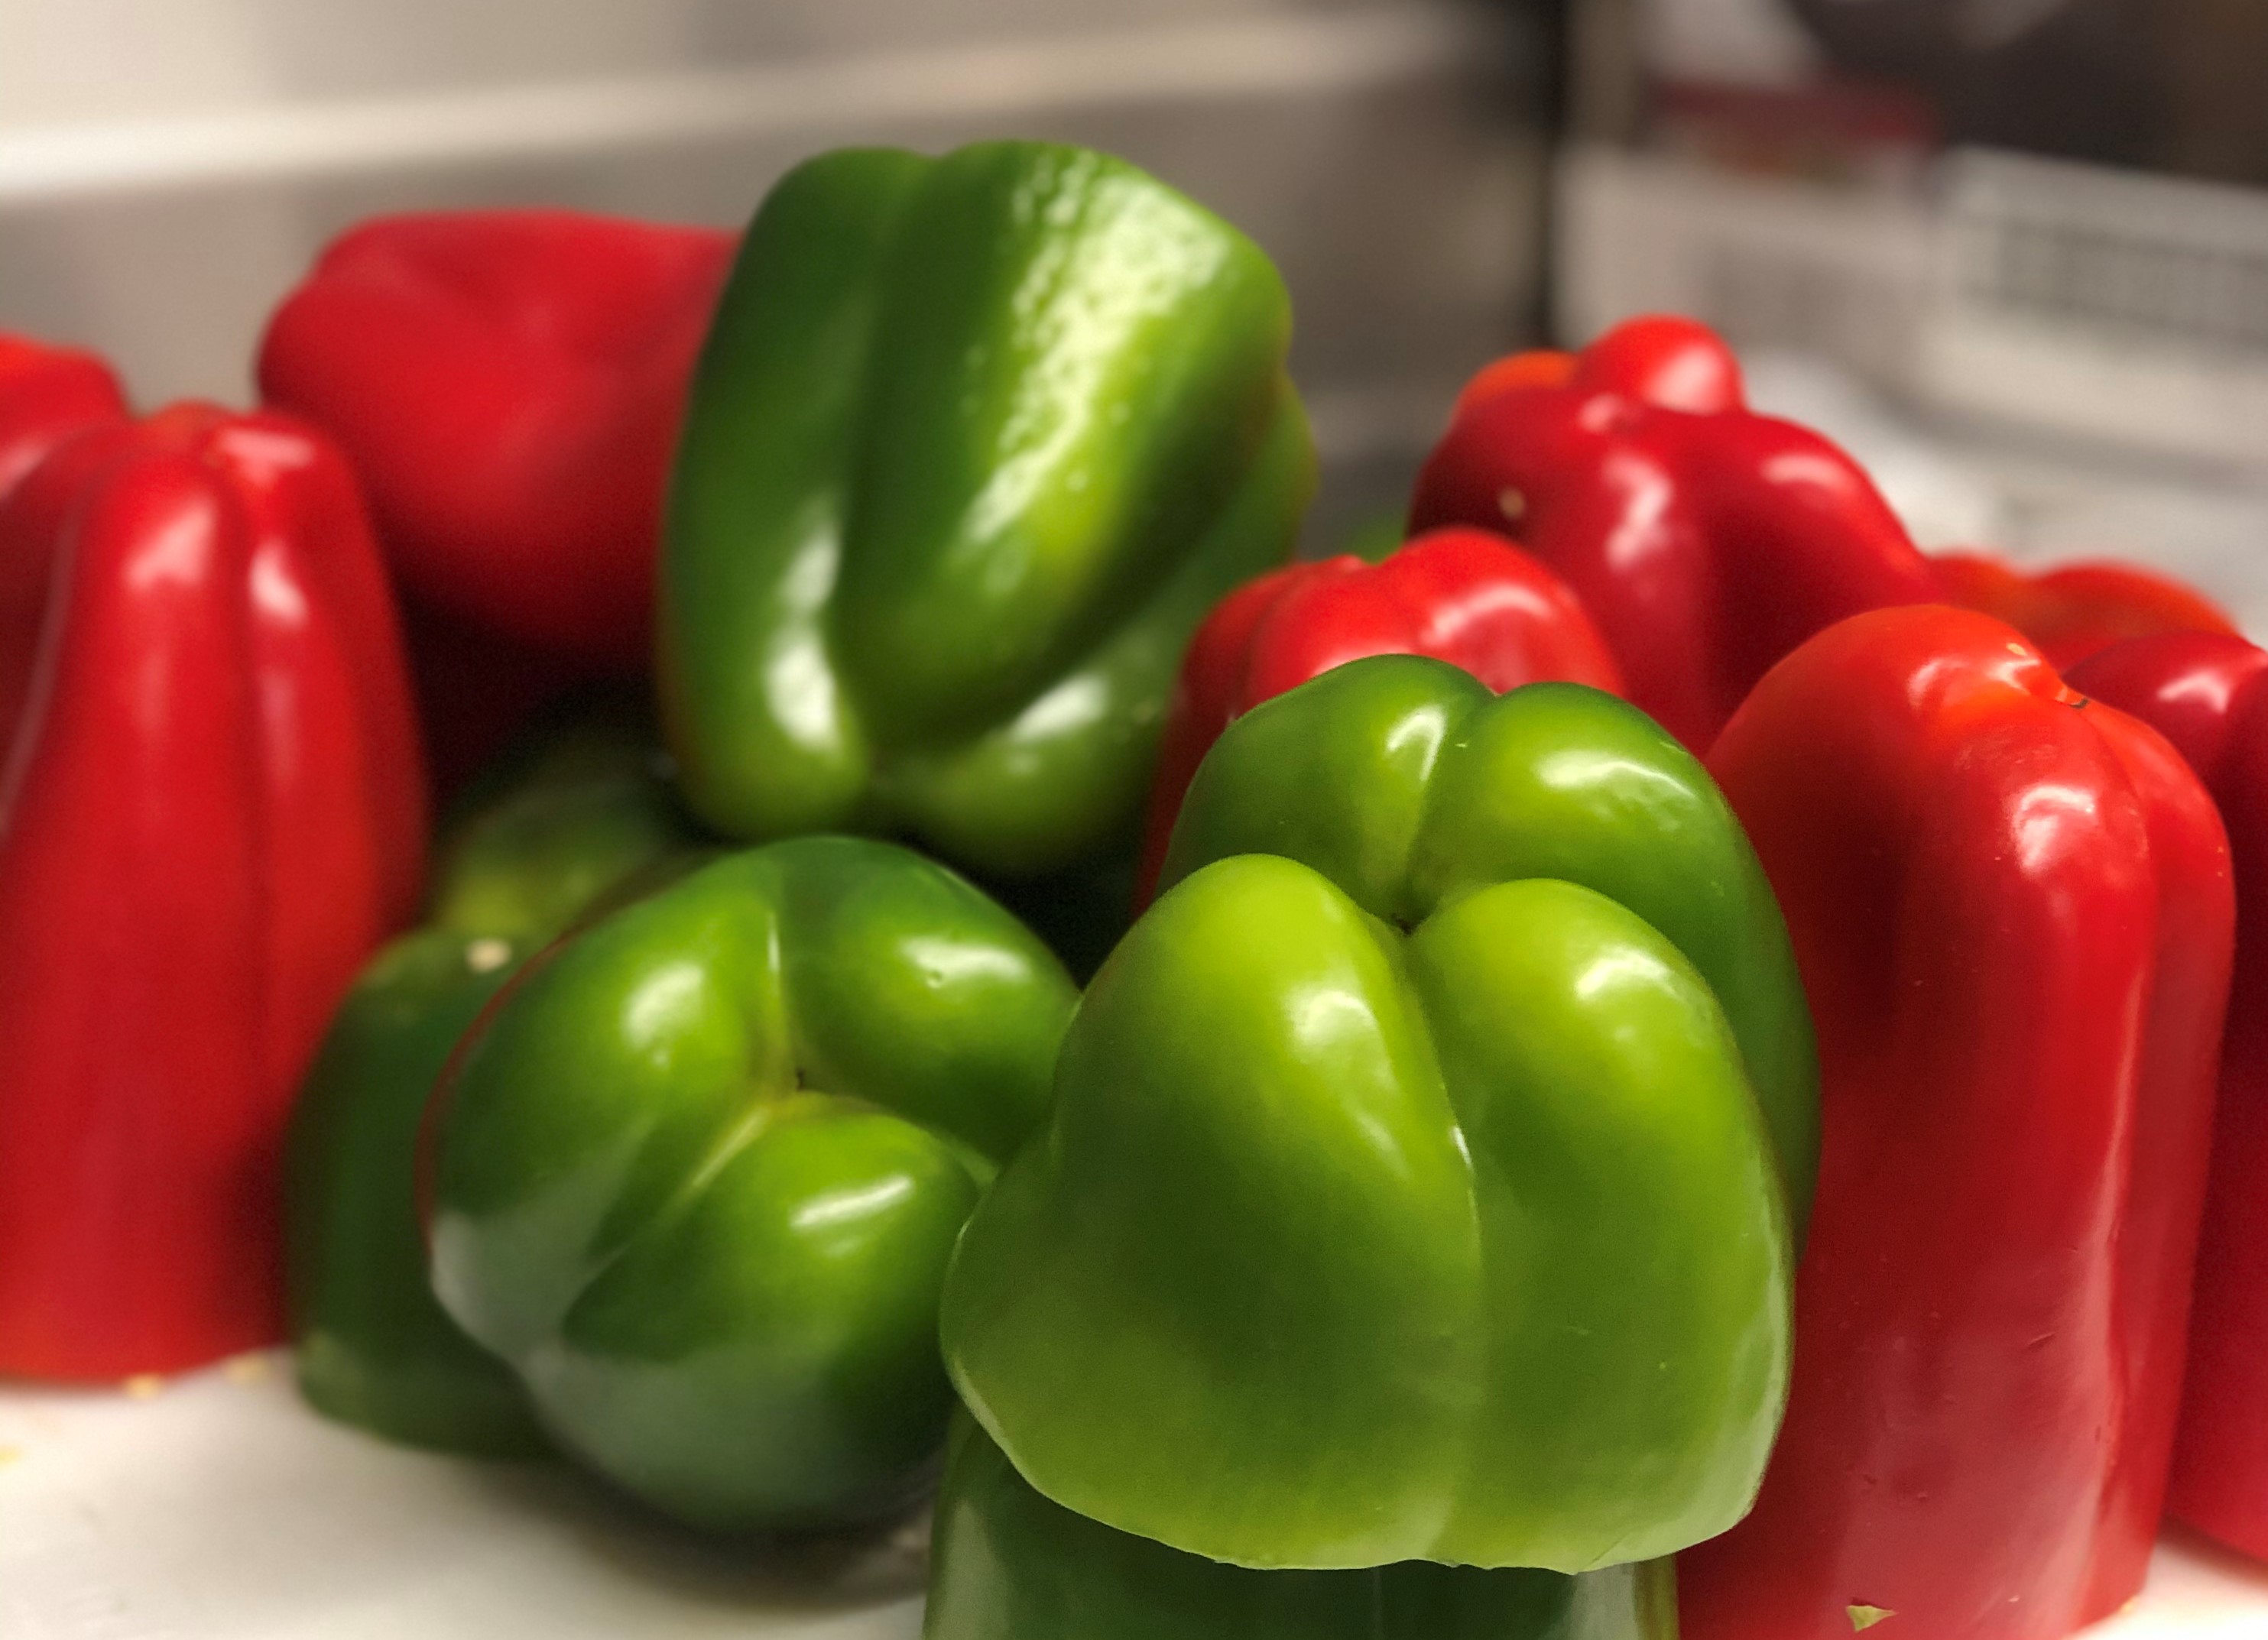 Peppers being prepared for a meal